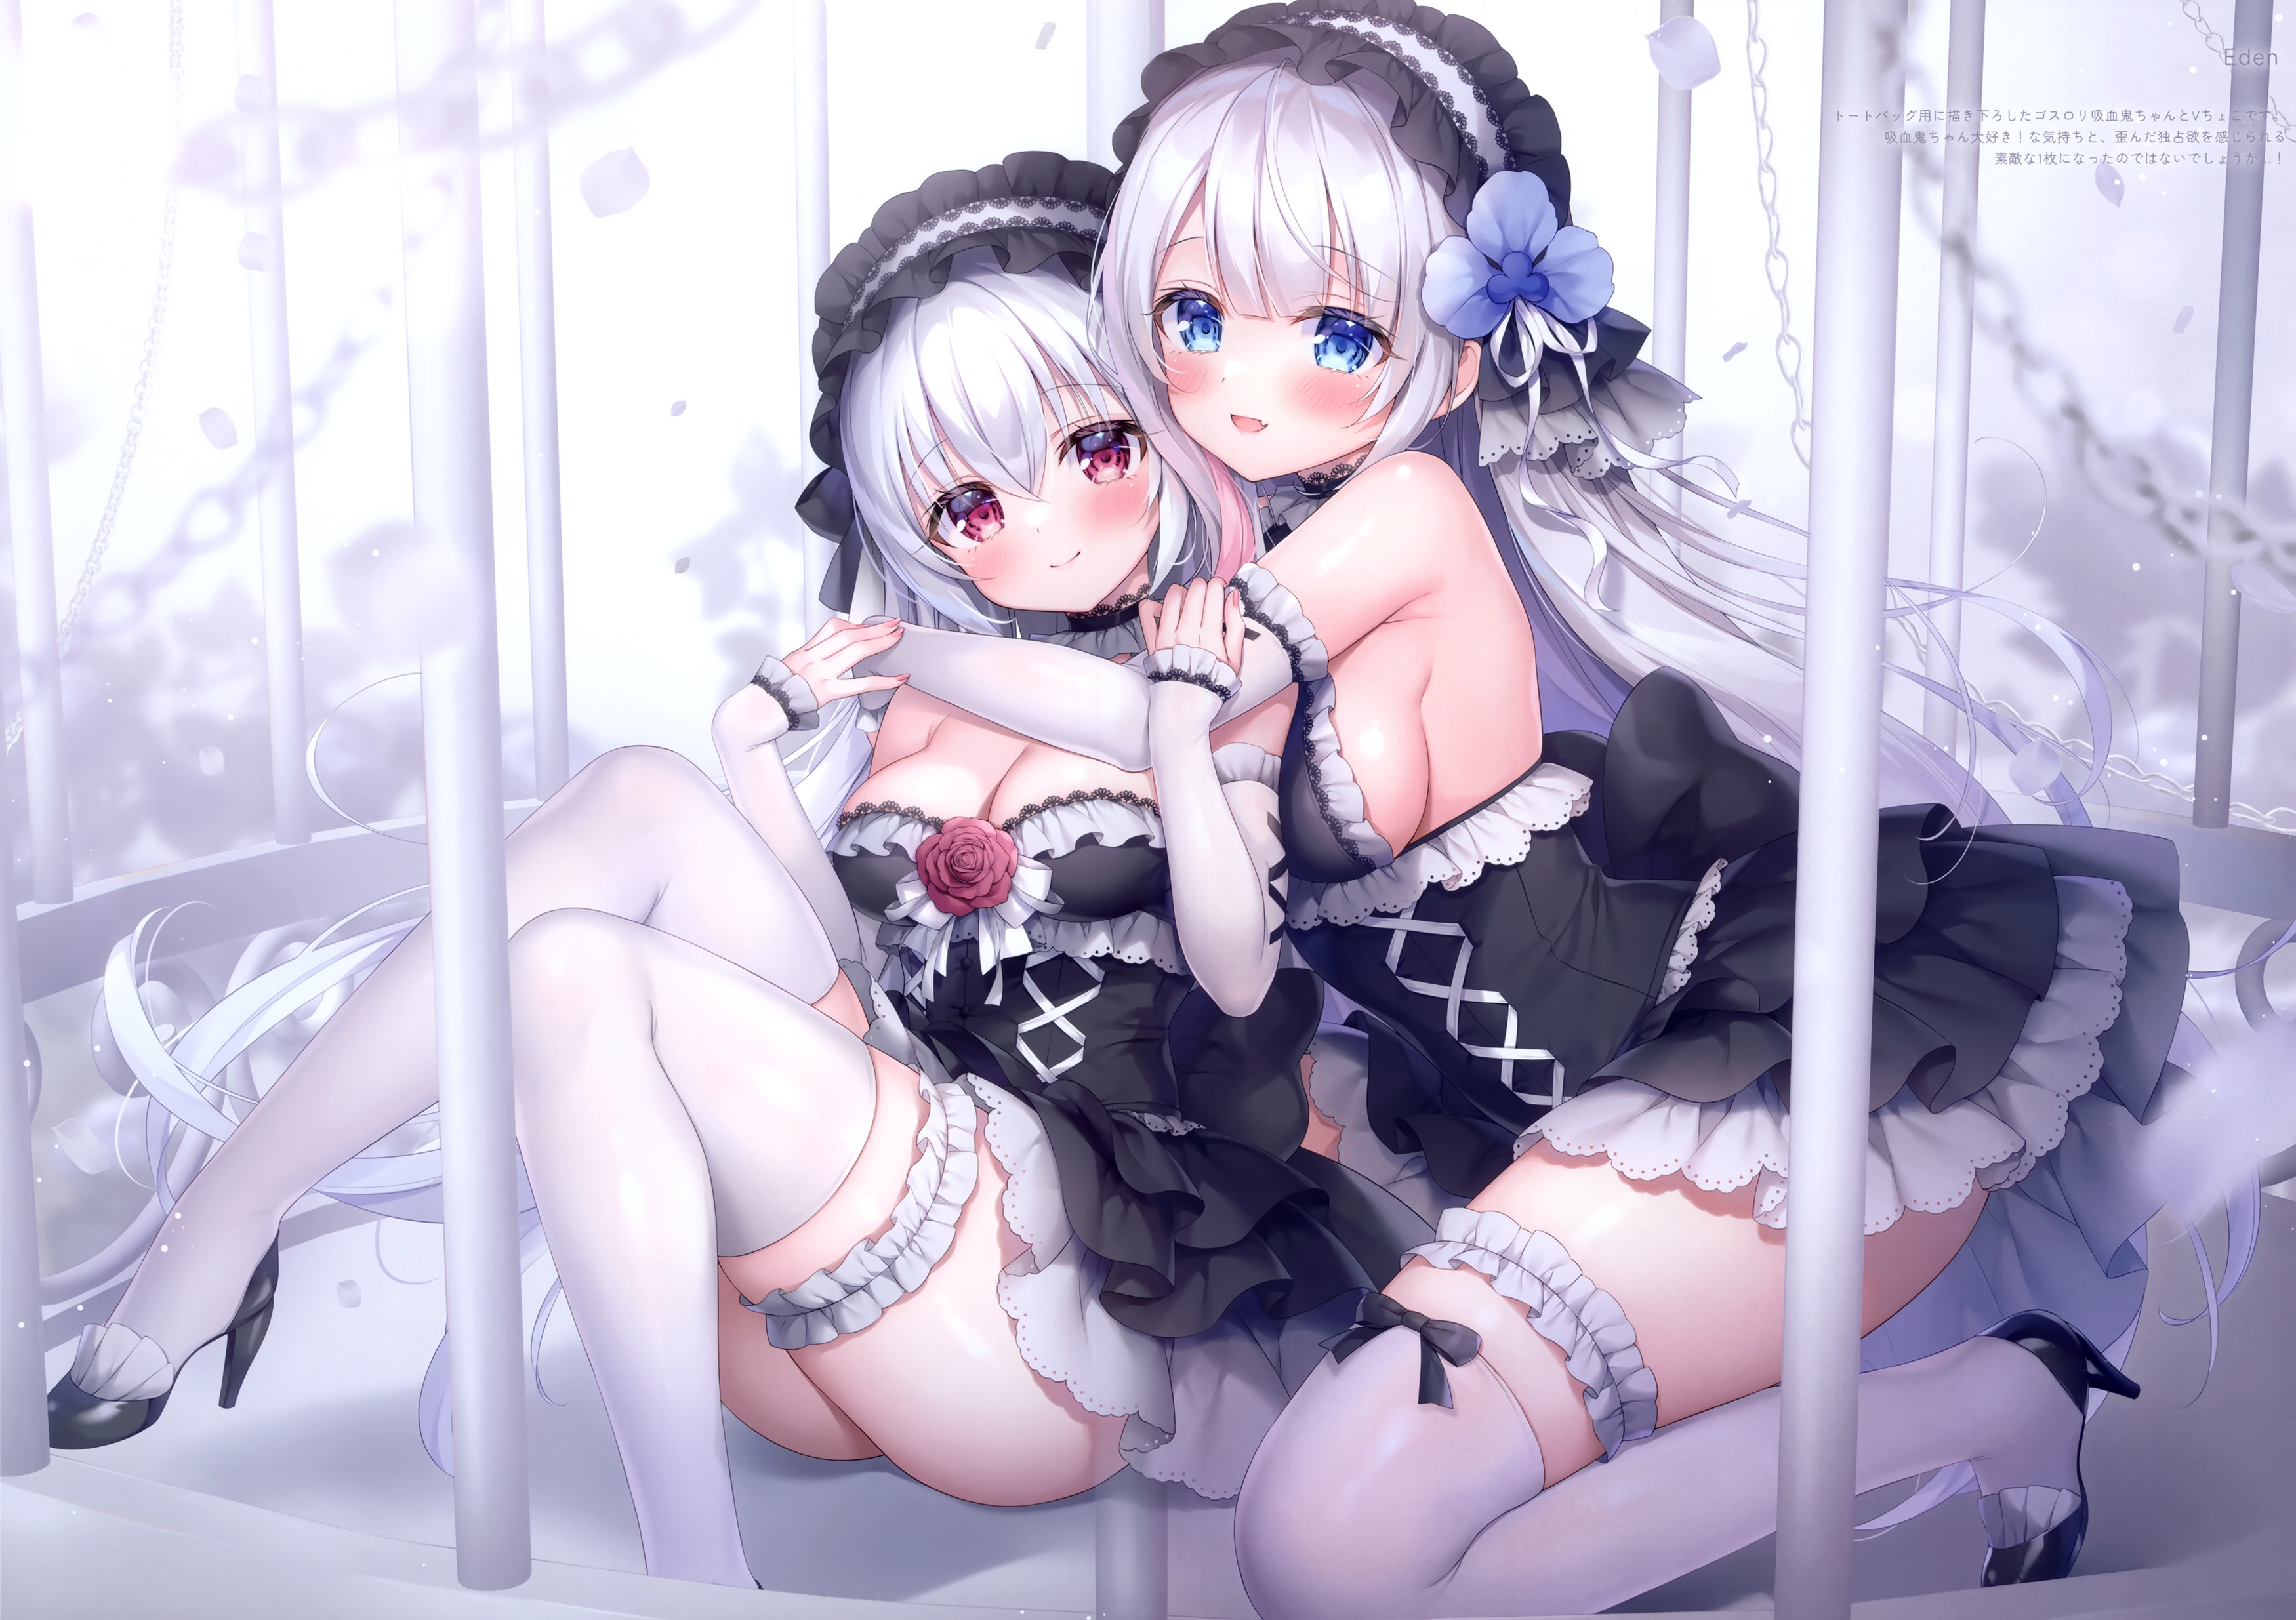 Anime Anime Girls Blushing Looking At Viewer Long Hair Cages Heels Elbow Gloves White Hair Red Eyes  3500x2470